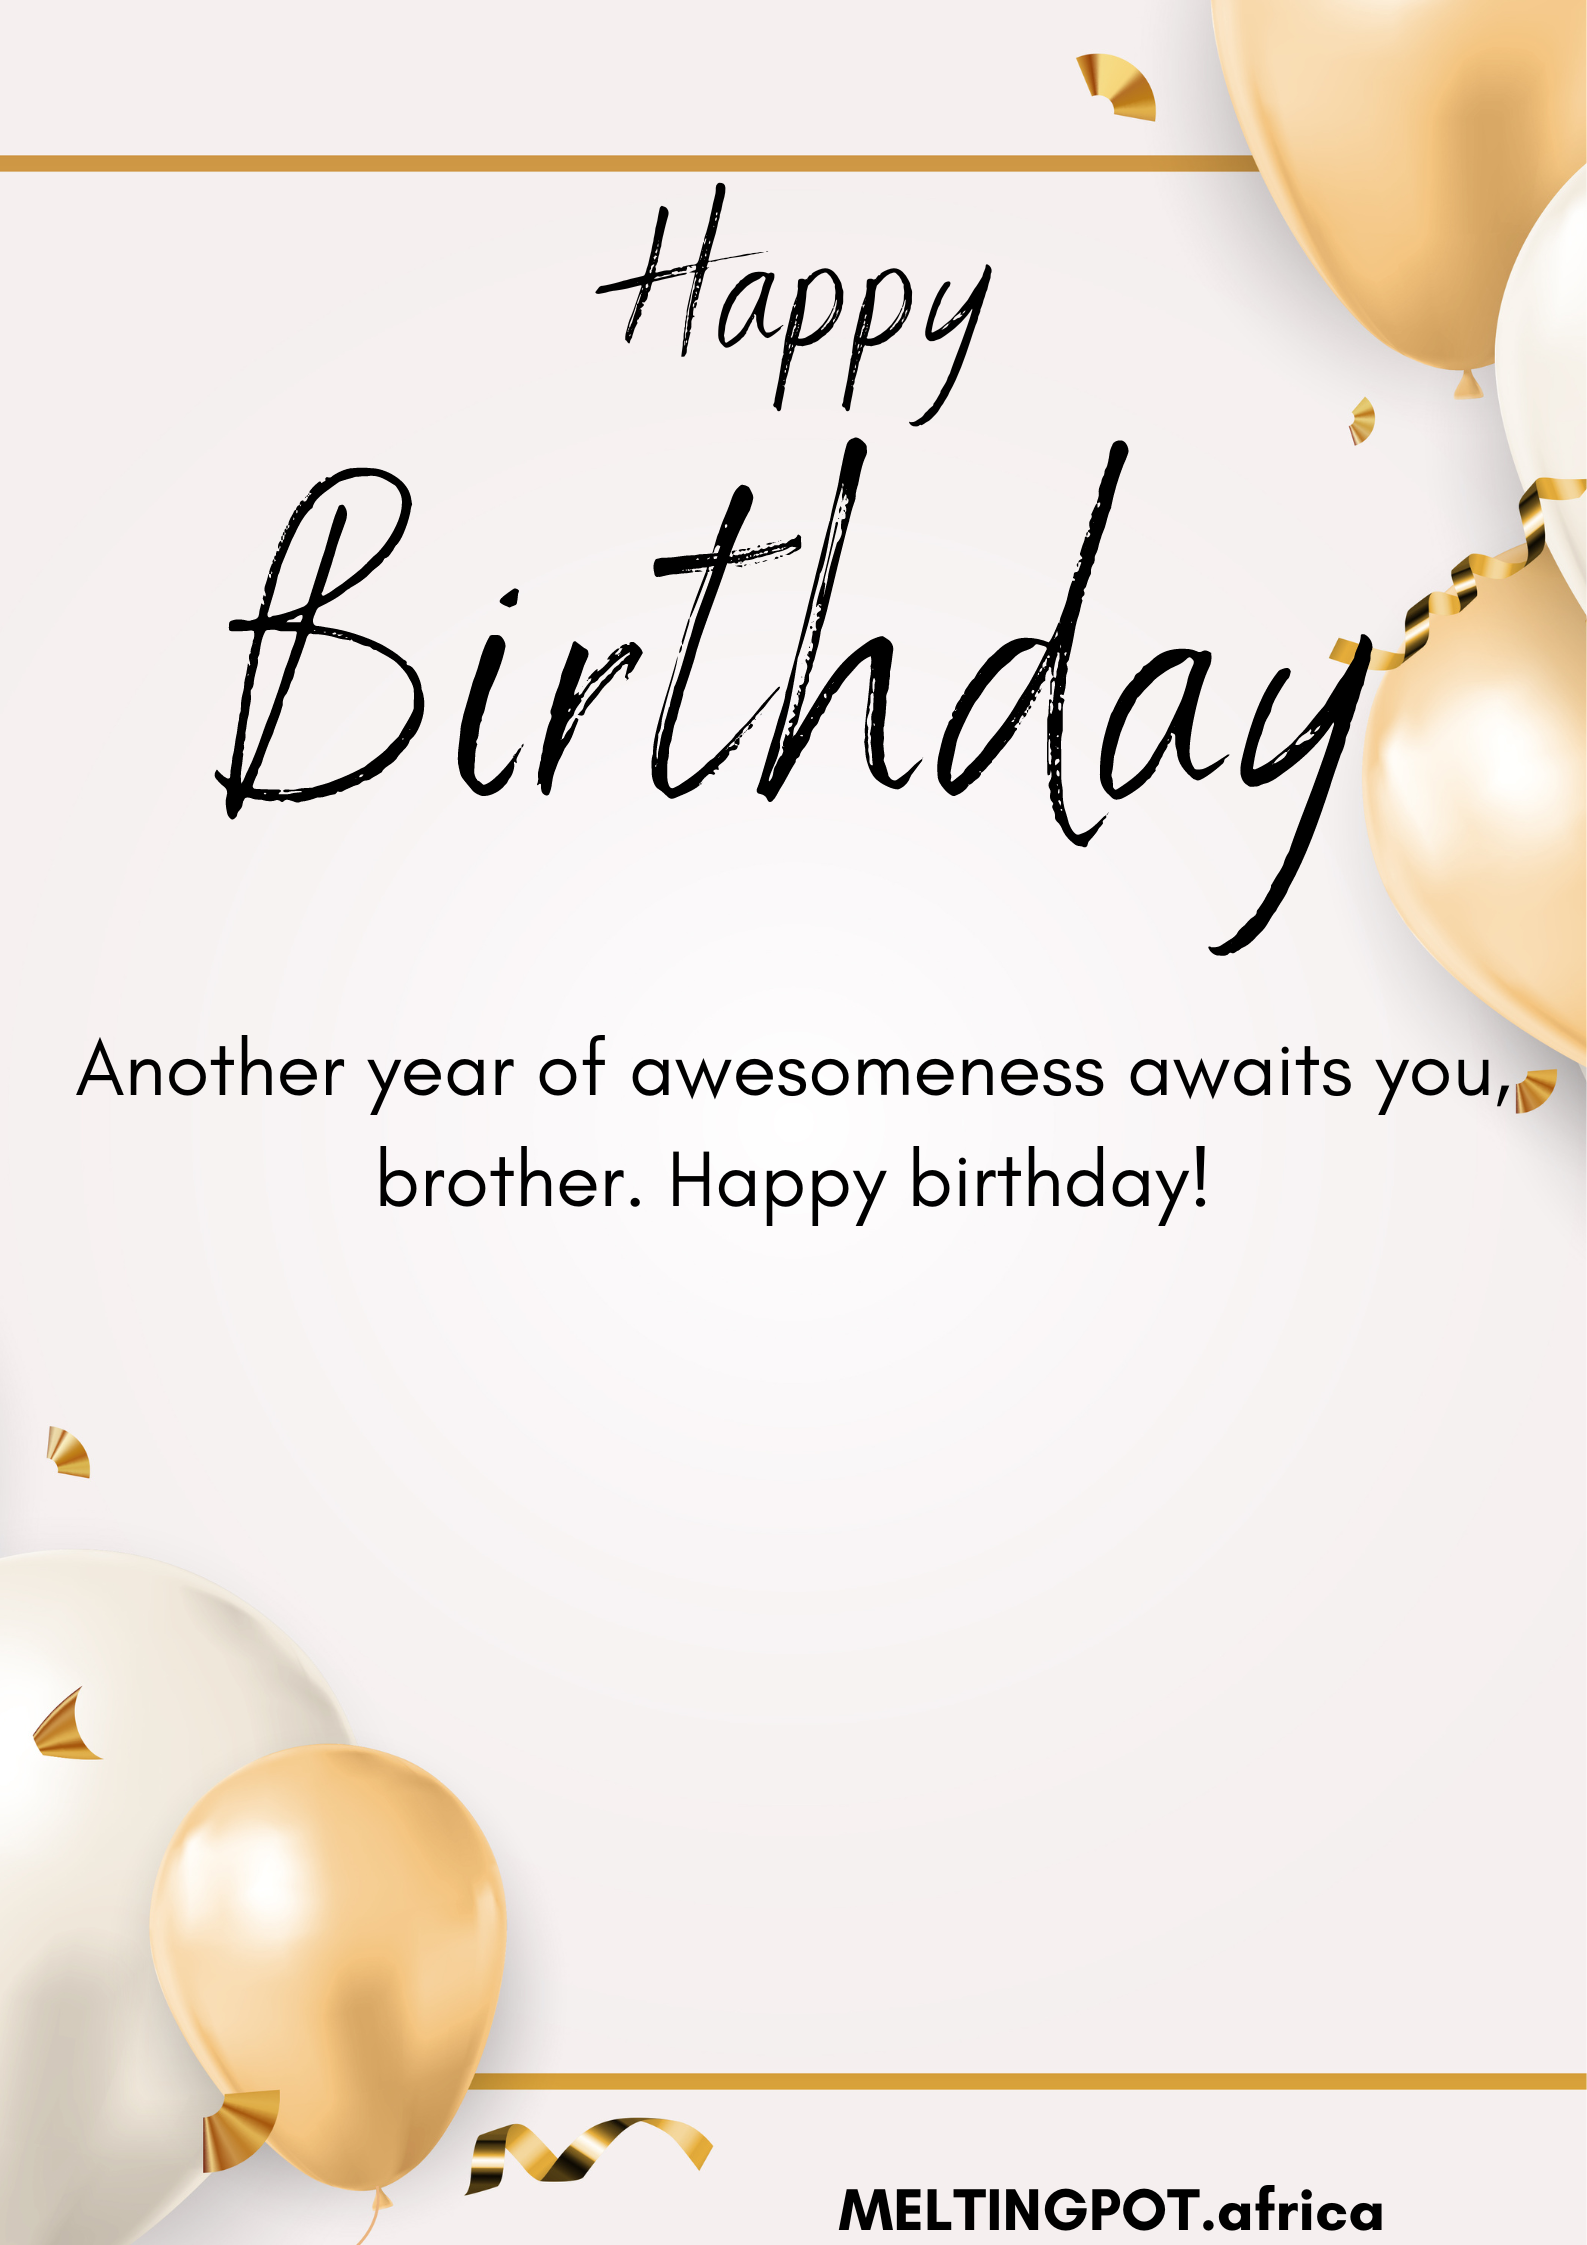 For brothers, sometimes a simple birthday wish is all they need. Keeping it short and sweet, here are some simple birthday wishes to send to your brother: